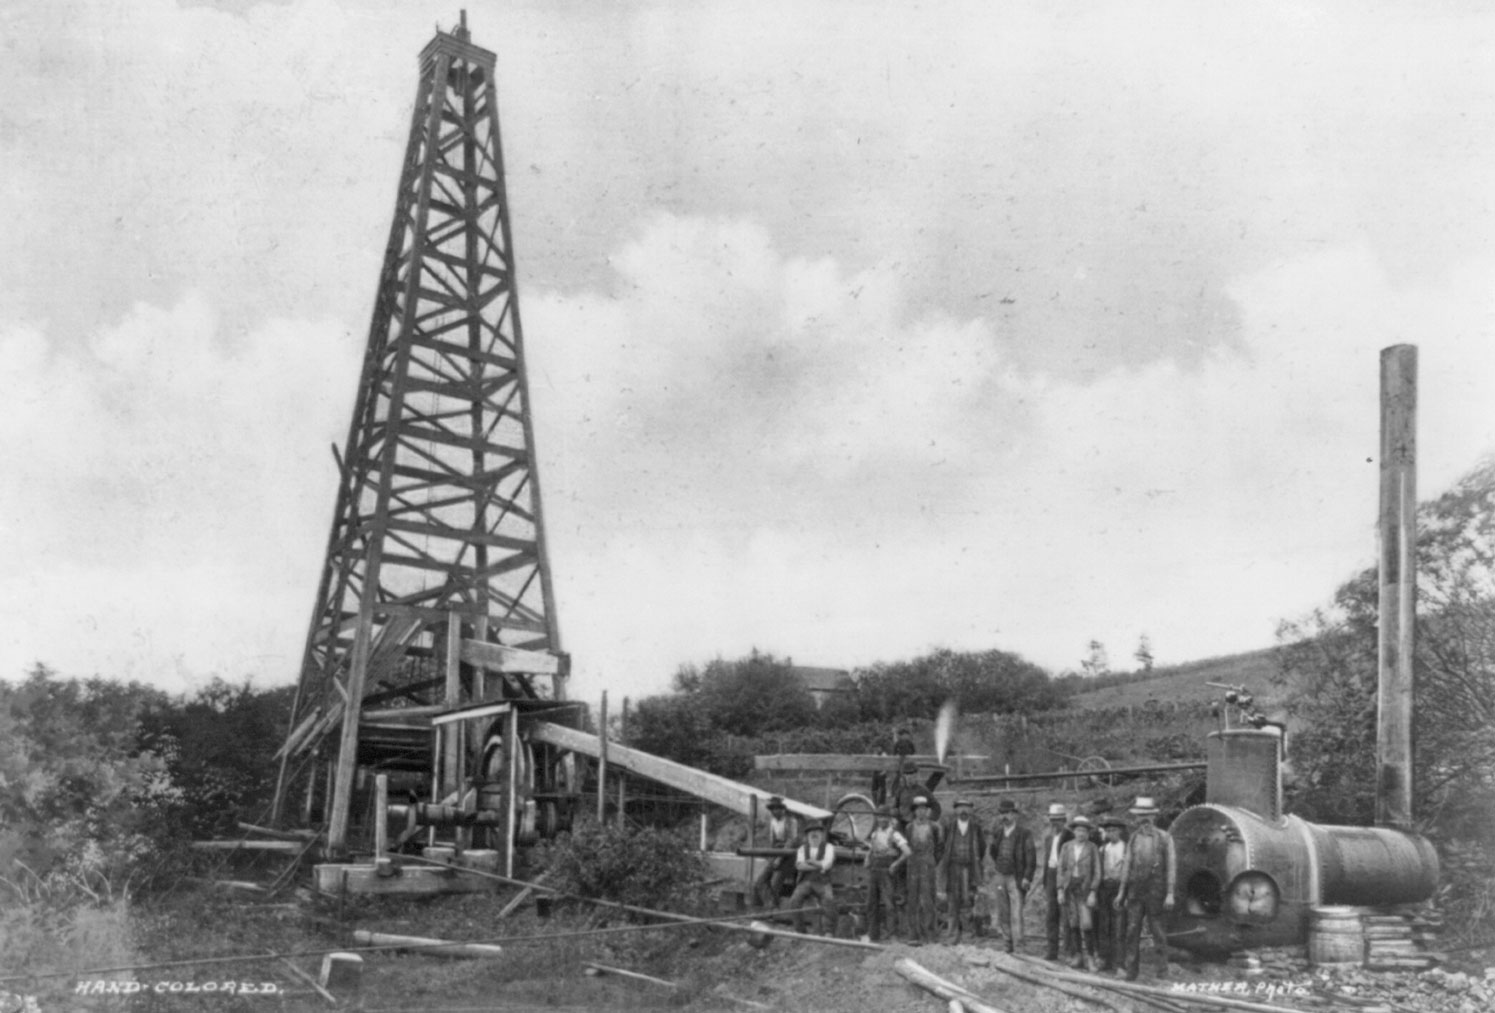 Black and white photograph of an oil derrick in Titusville, Pennsylvania, around 1900. The photo shows a derrick, which looks like a taper tower made out of wood or metal beams, rising to the left. In the right foreground, a group of men stands. Other equipment is scattered behind and around the men.